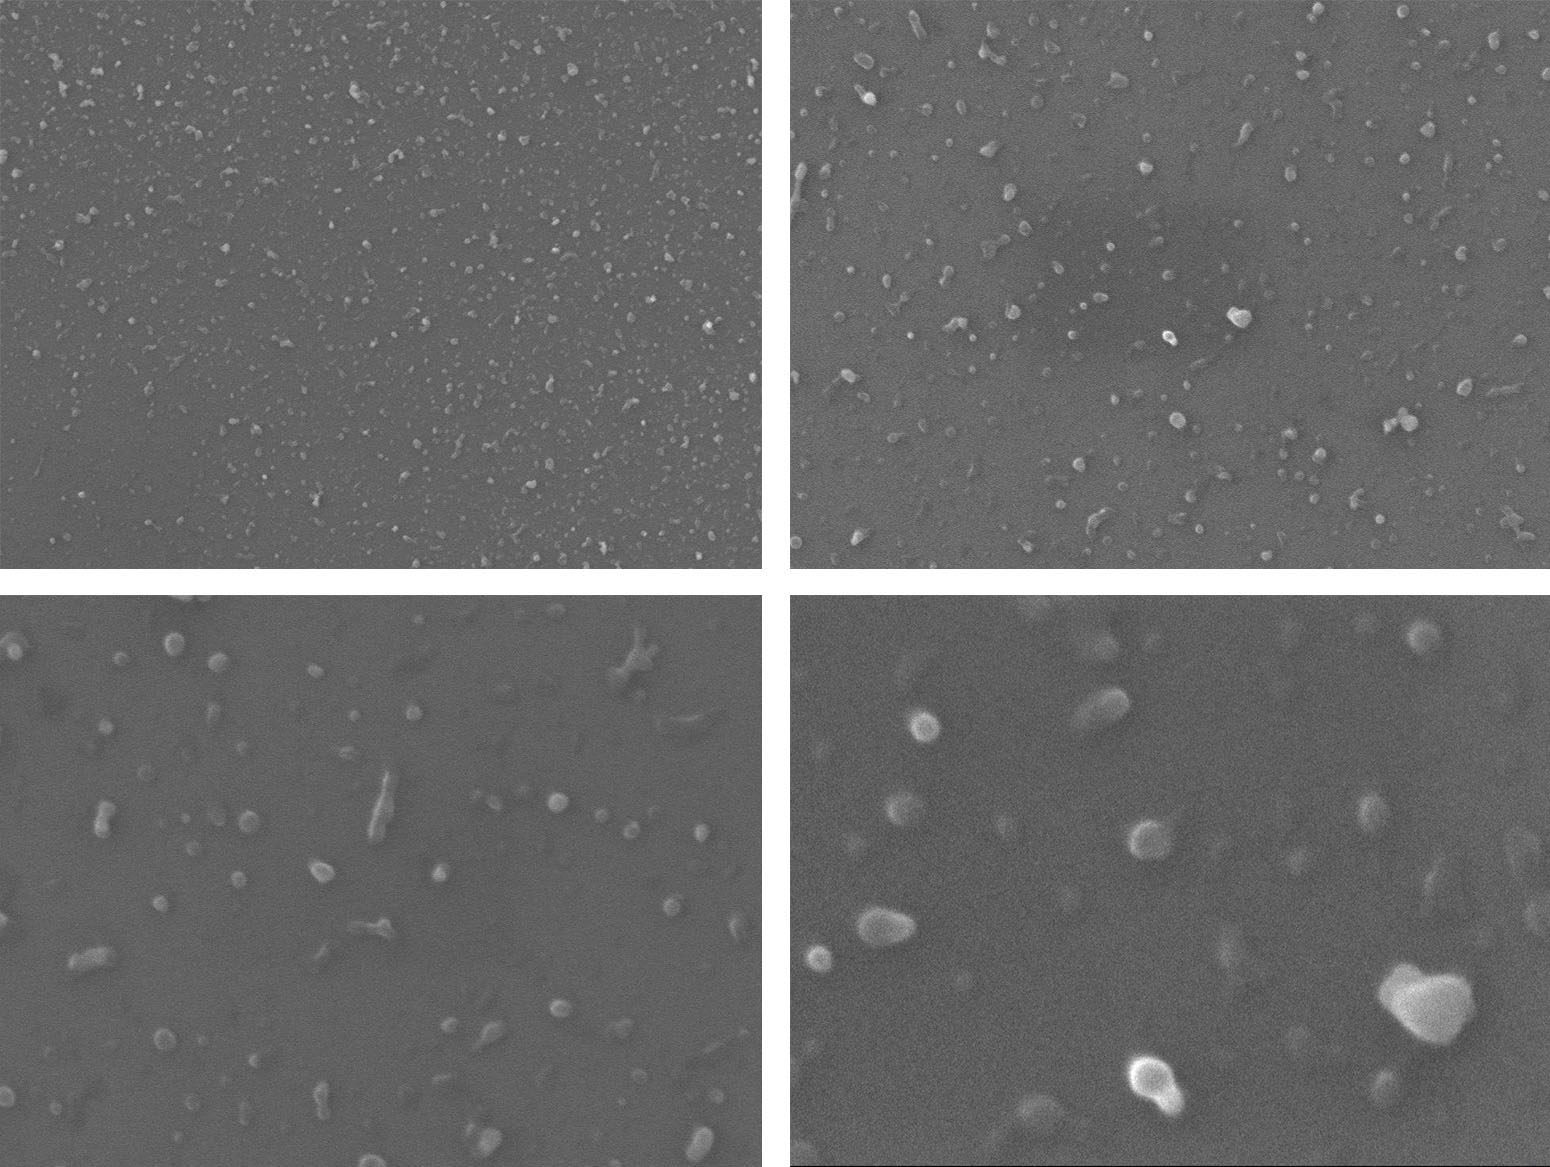 High resolution images of plastic nanoparticles